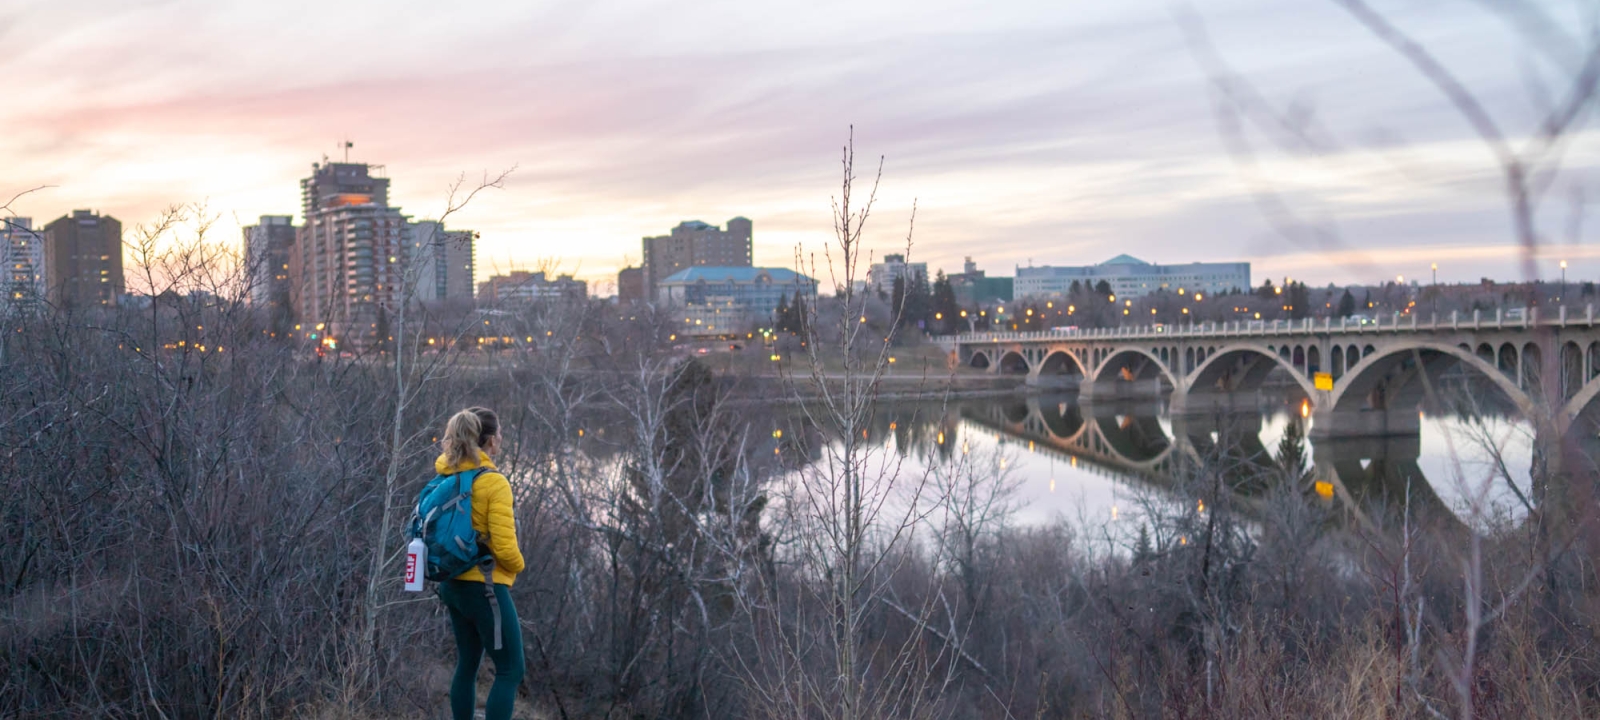 Five Things to Do Outside in Saskatoon On Your Own